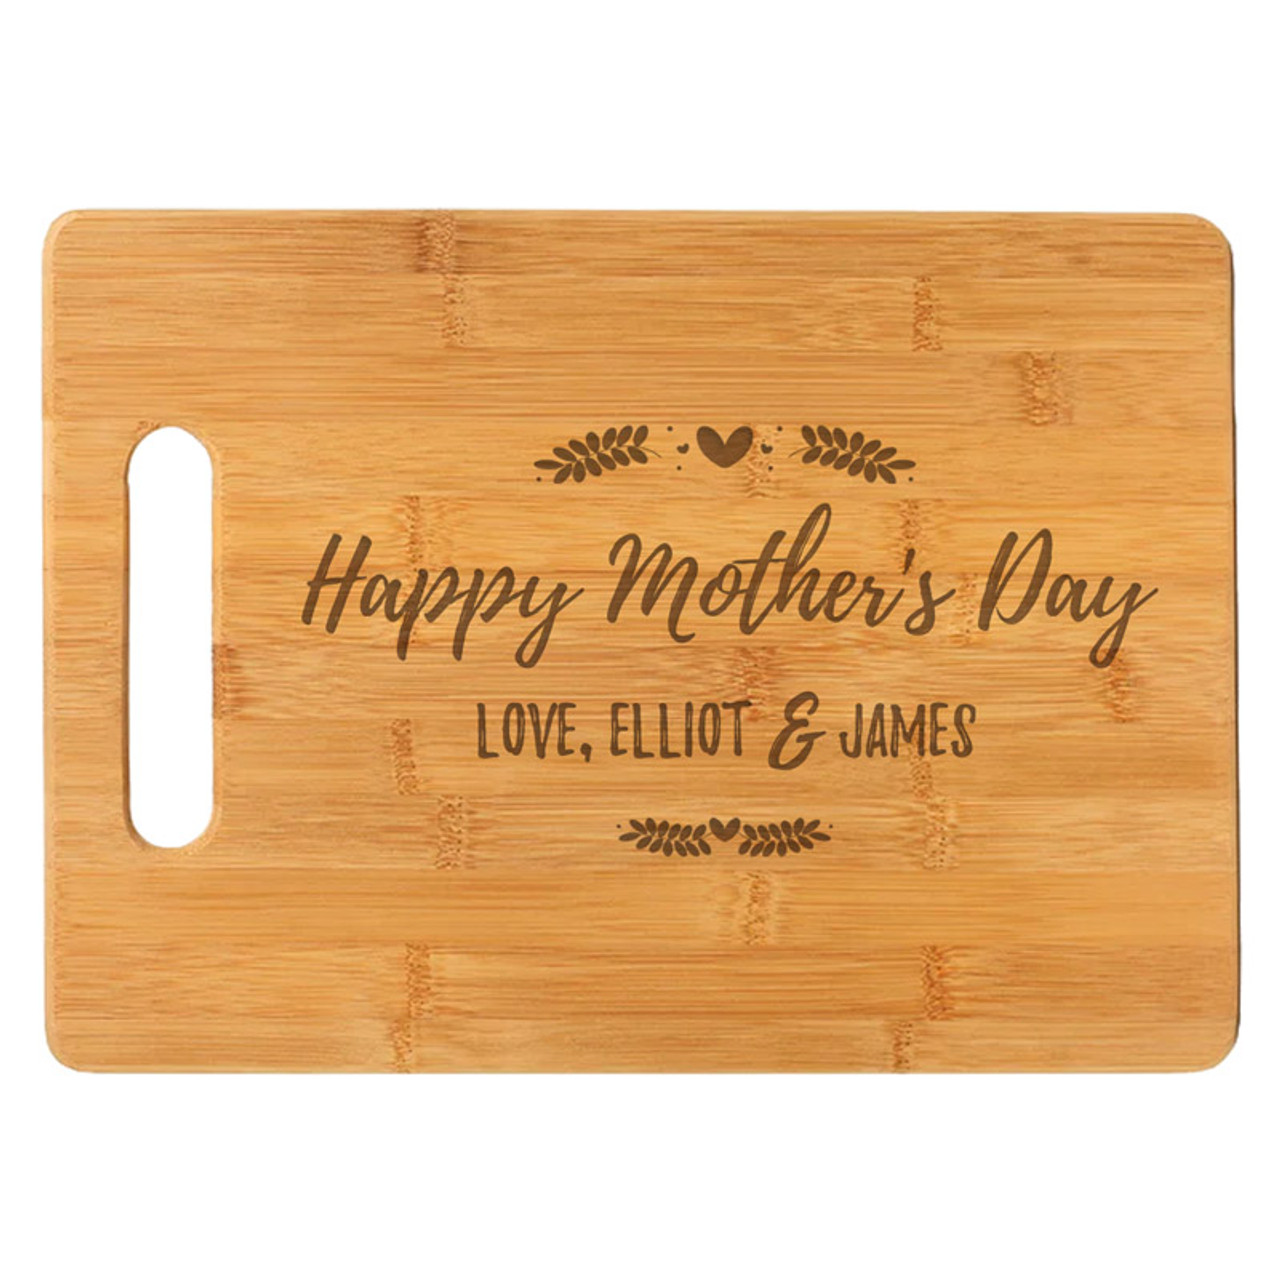 Mother's Day Gift Personalized Bamboo Wood Cutting Board (14x 10) -  Northwest Gifts